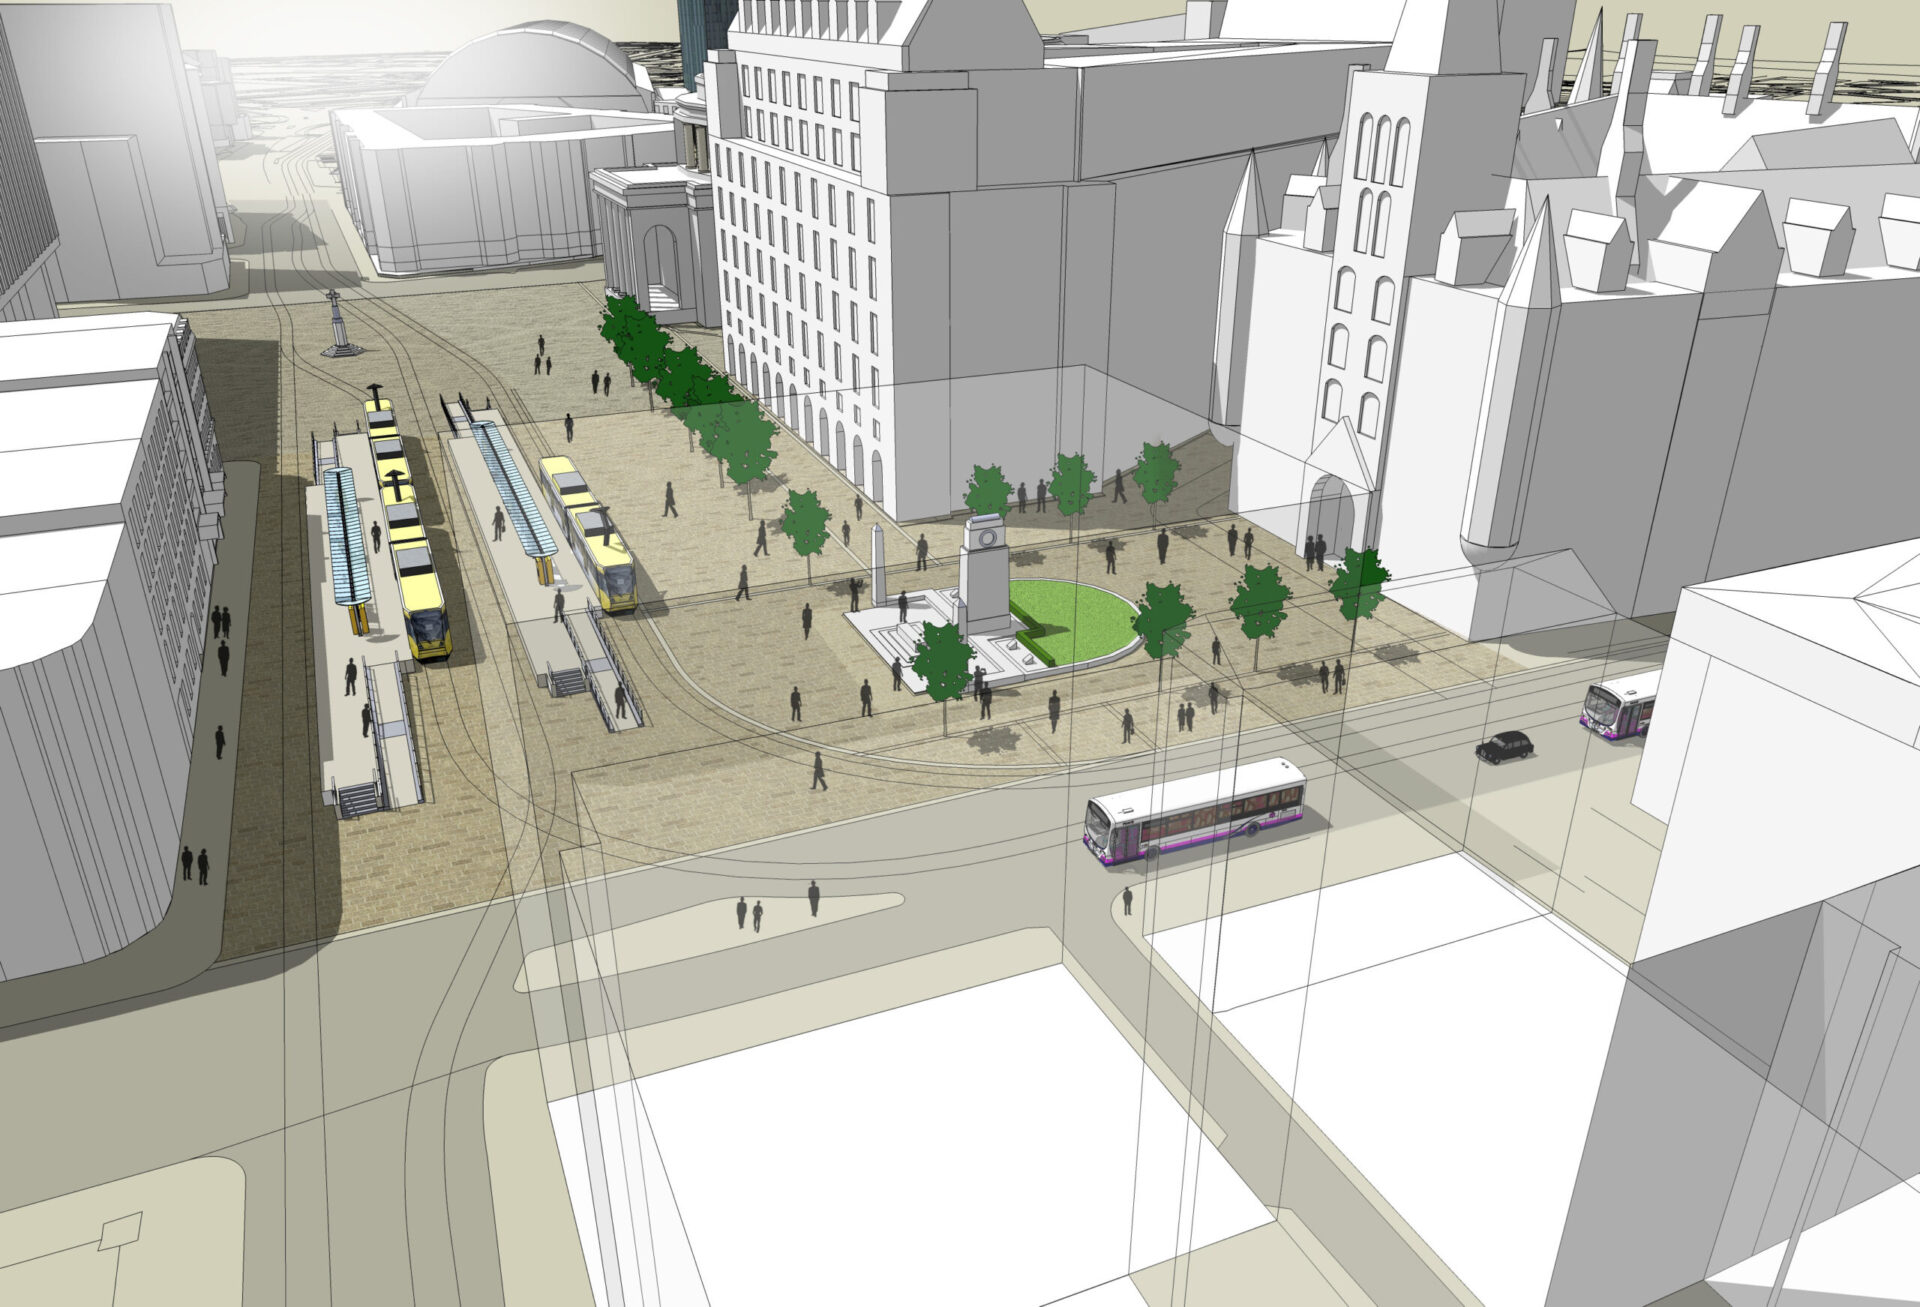 Transport for Greater Manchester's artist impression of how St Peter’s Square could look